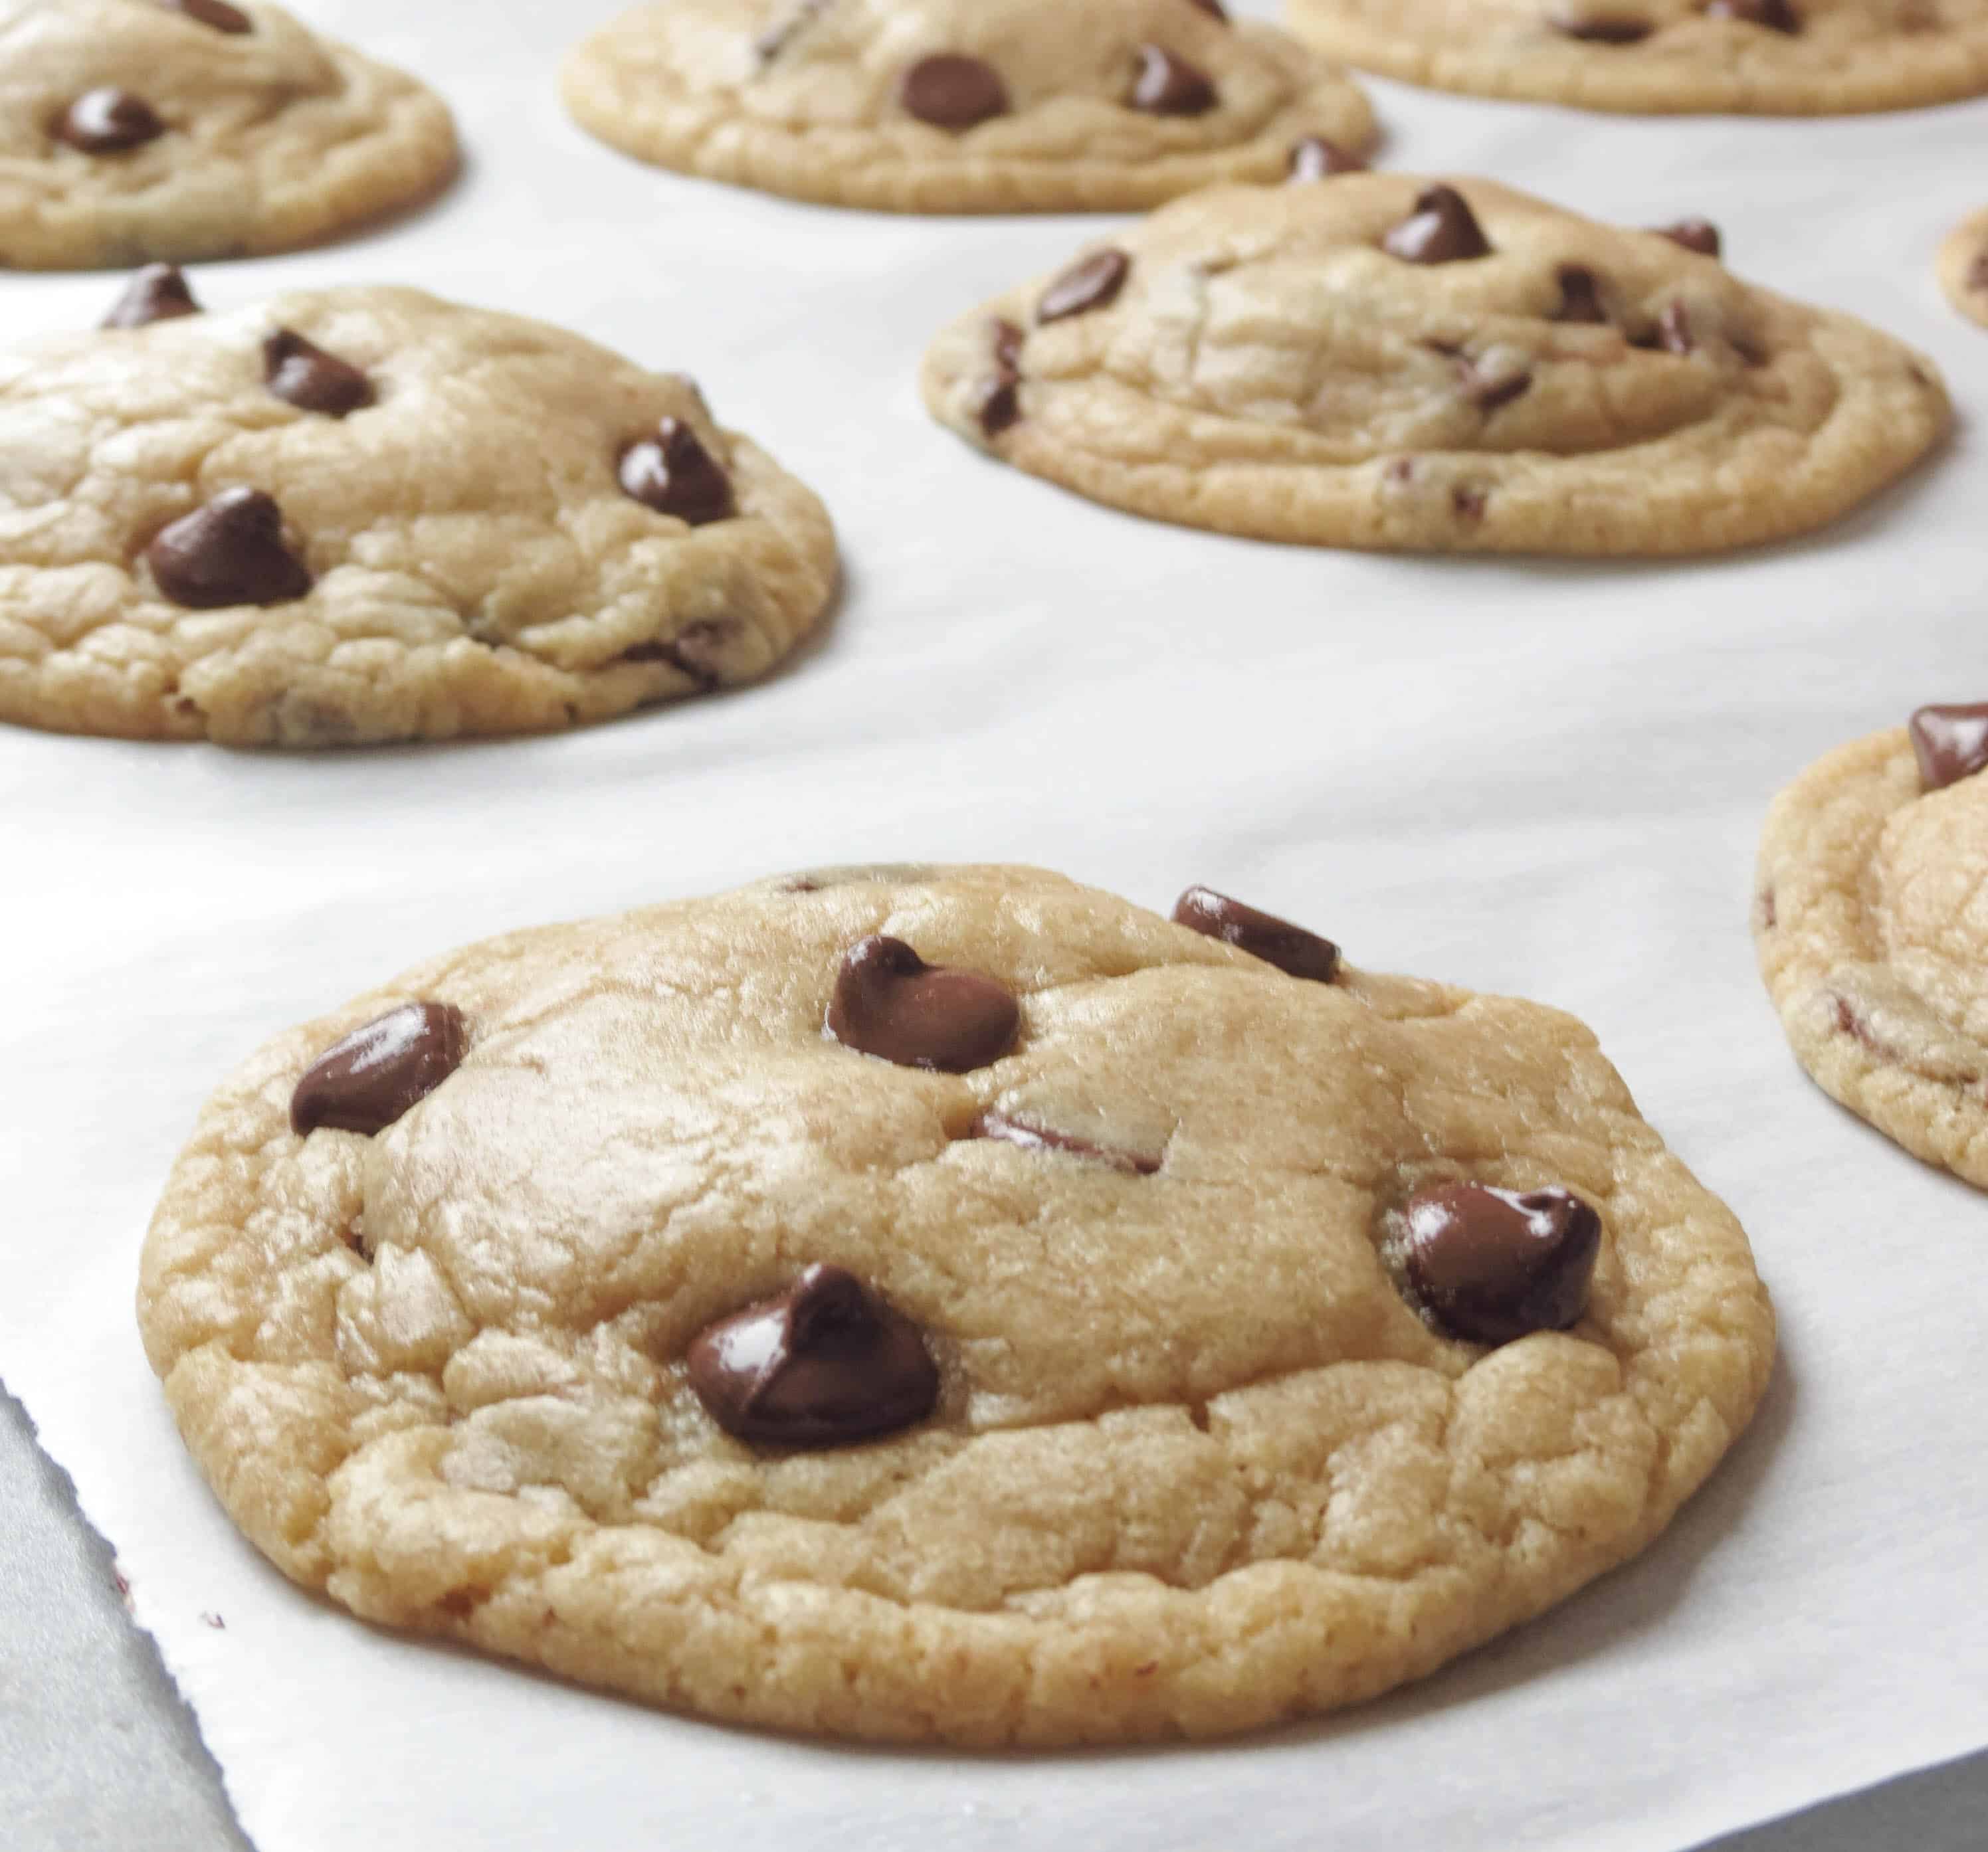 Soft-Baked Chocolate Chip Cookies My Favorite - Sprinkle Some Sugar